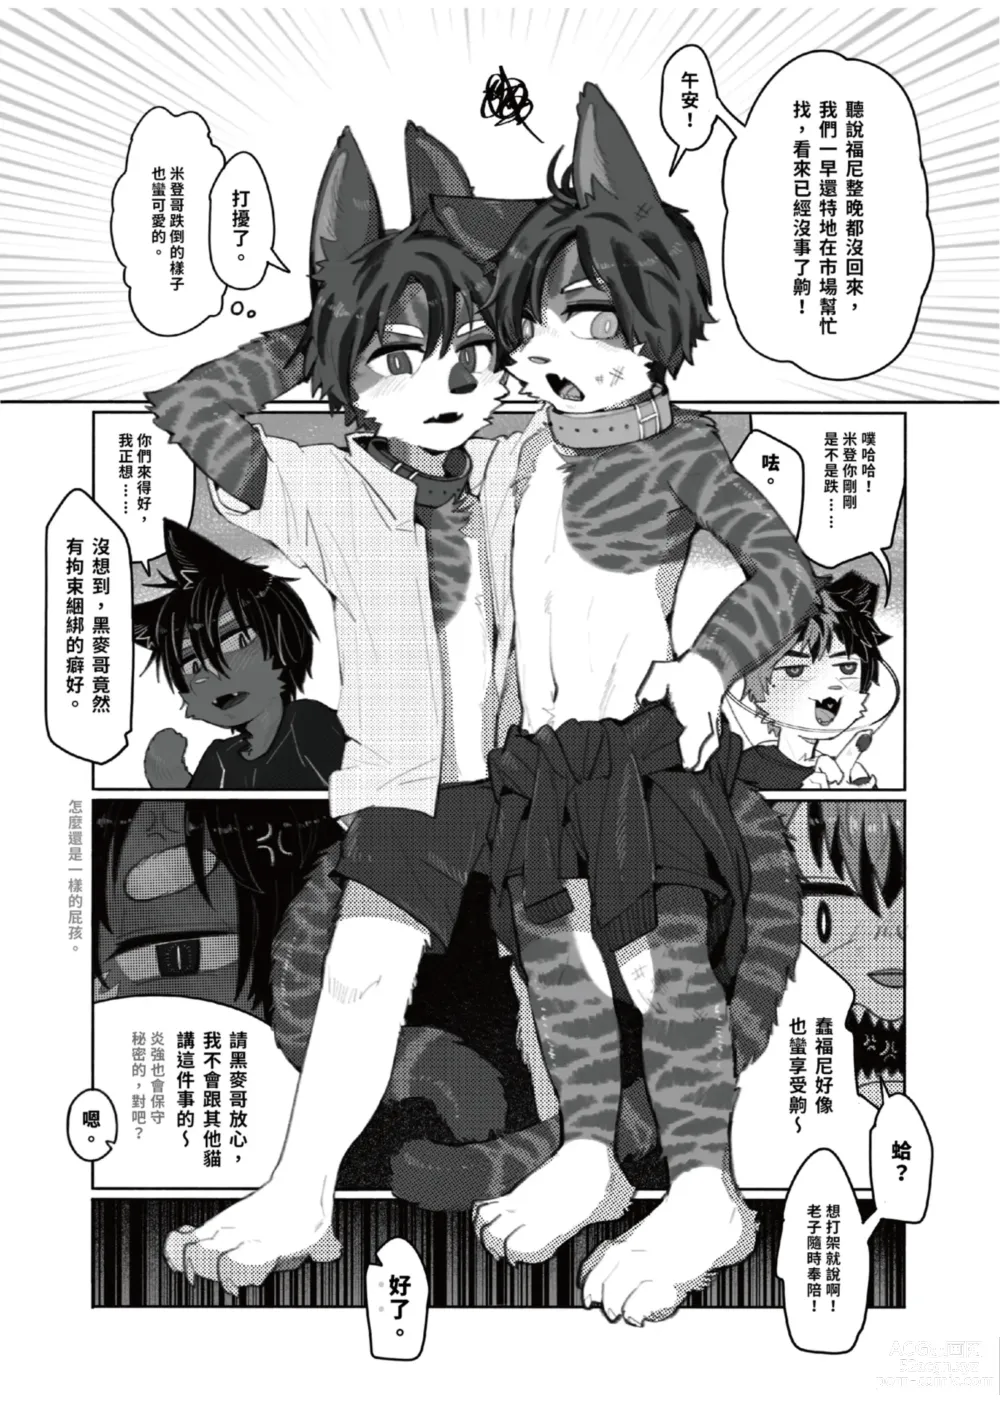 Page 6 of doujinshi 巷弄發浪 Heat Alley